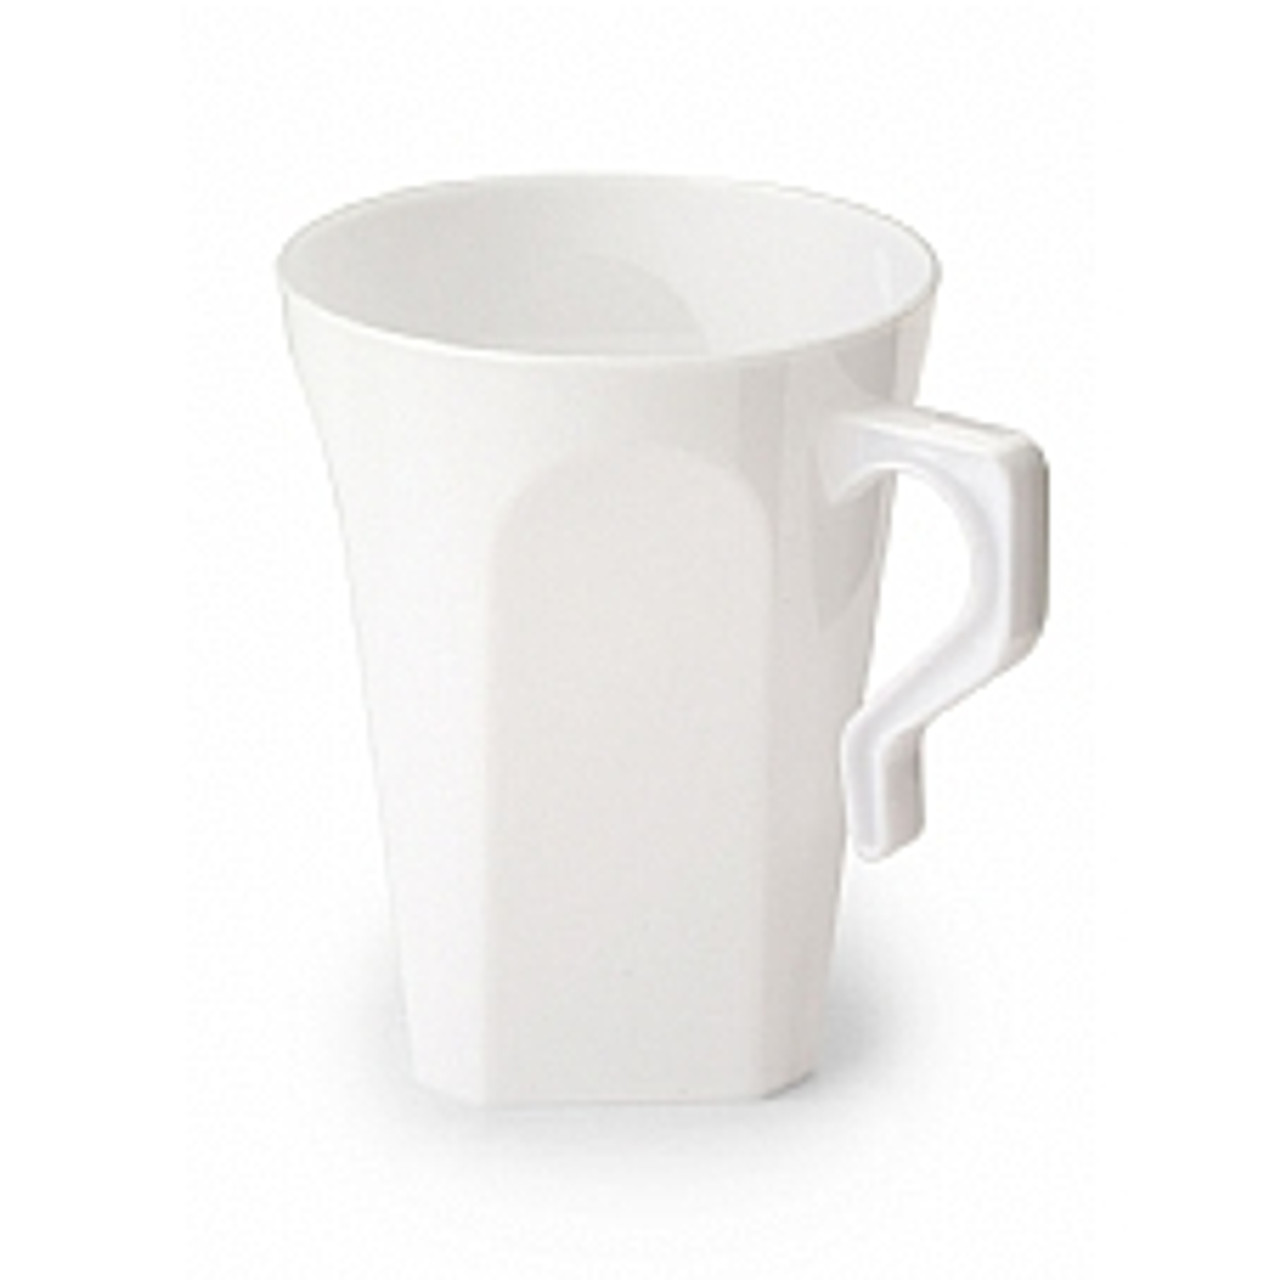 https://cdn11.bigcommerce.com/s-hgqmwywp99/images/stencil/1280x1280/products/49216/44007/8-5-oz-square-bottom-plastic-coffee-mugs-8ct-16__17660.1675880319.jpg?c=1?imbypass=on